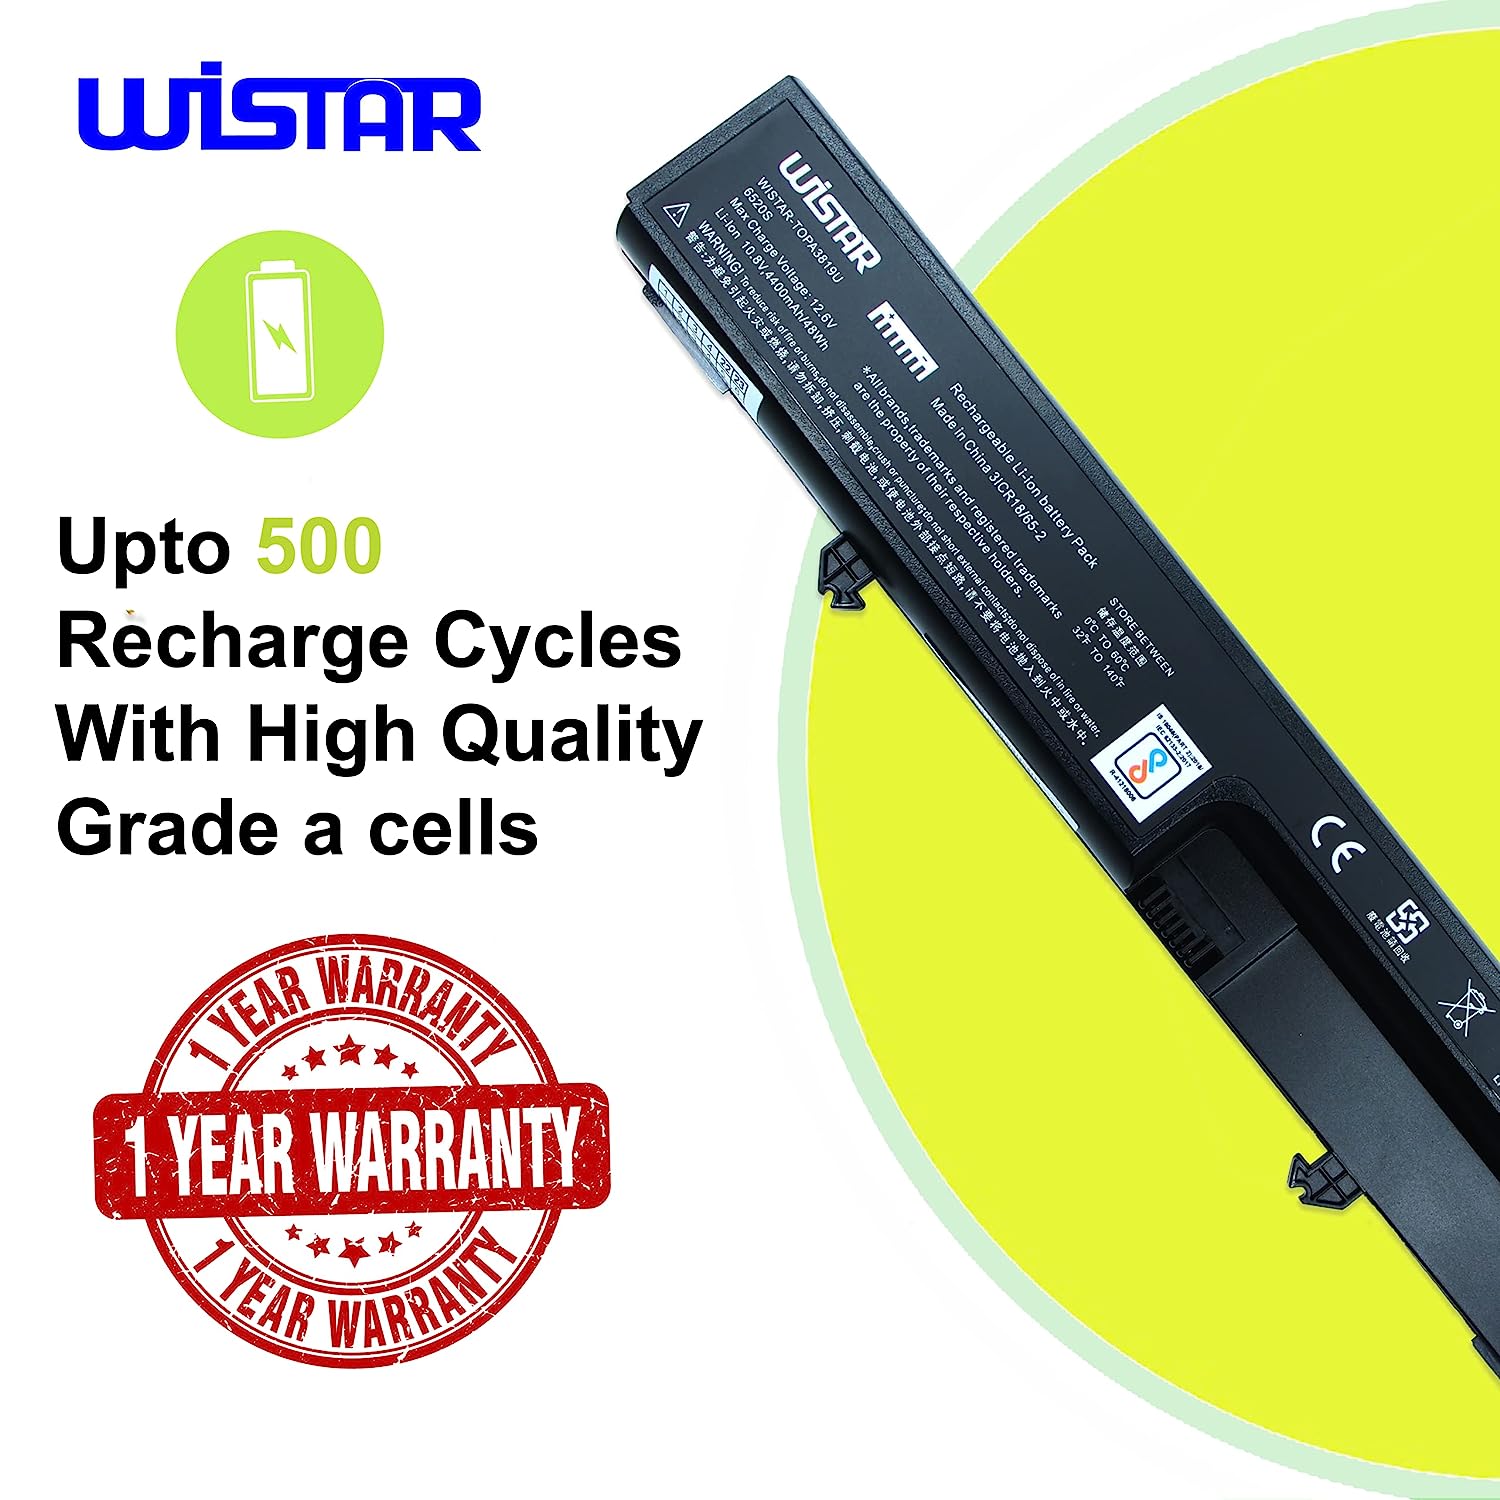 WISTAR Laptop Battery 6520 Compatible for HP Compaq 510, 511, 515, 540, 541, 6520S, 6520P Business Notebook 6520S, 6530S, 6531S, 6535S